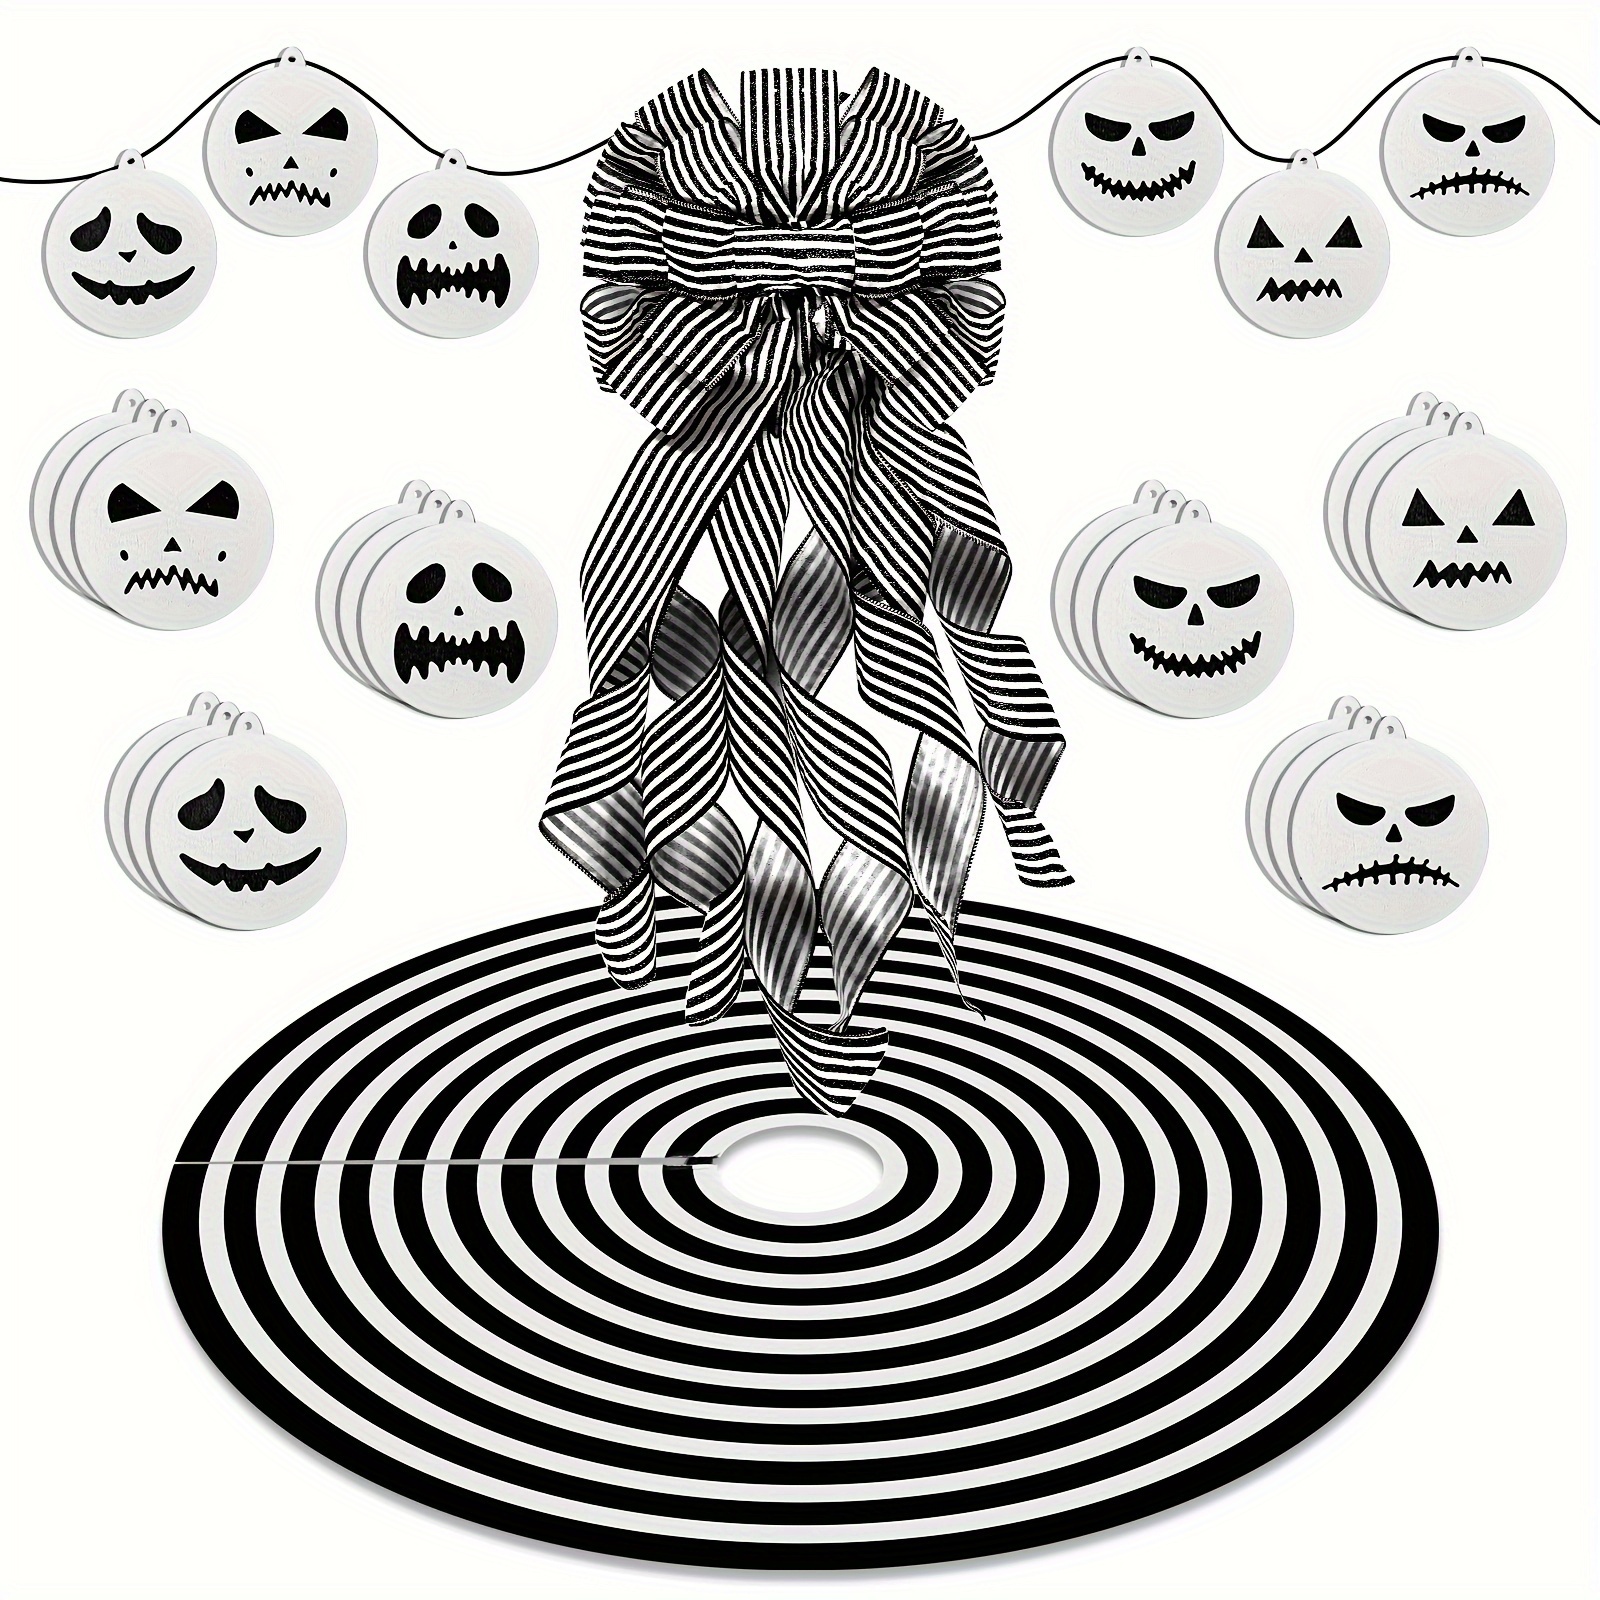 

26 Pcs Christmas Halloween Ornaments Black And White Tree Skirt 24pcs Hanging Wooden Ornaments Large Buffalo Plaid Christmas Tree Topper Bow For Indoor Outdoor Holiday Party Supplies